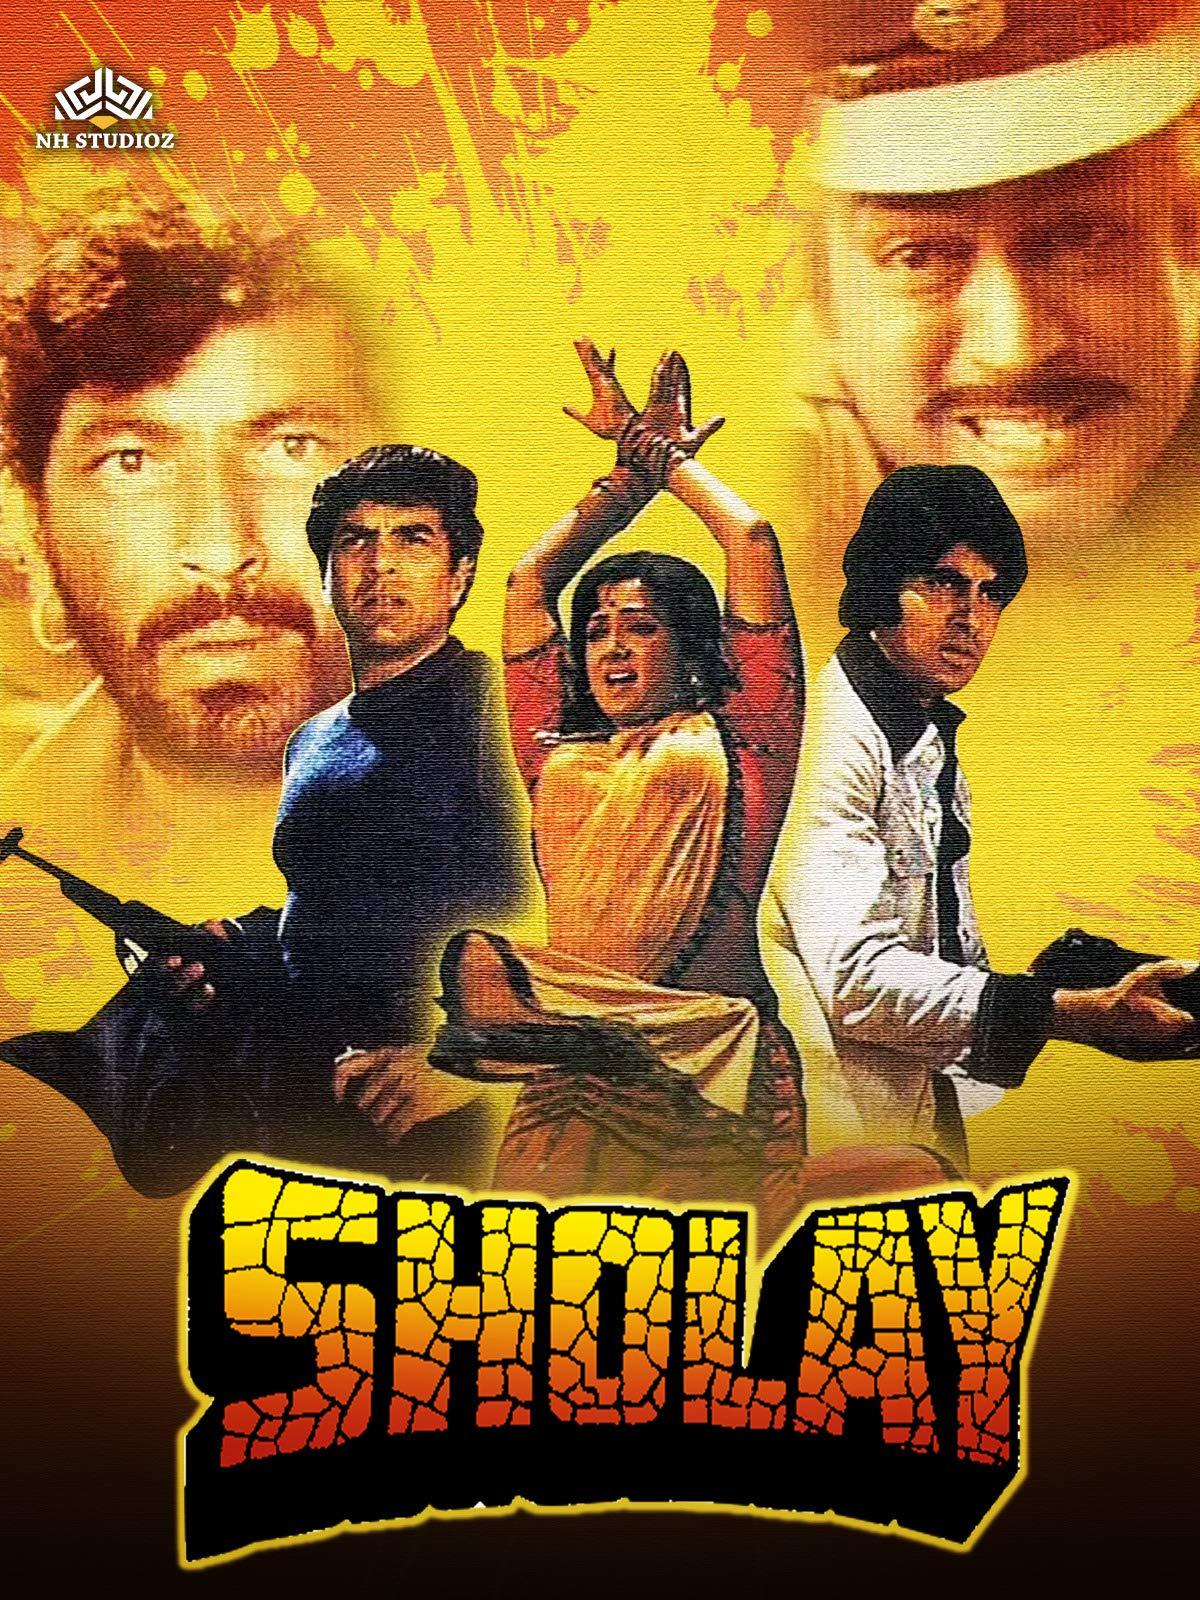 Film posters, Bollywood 